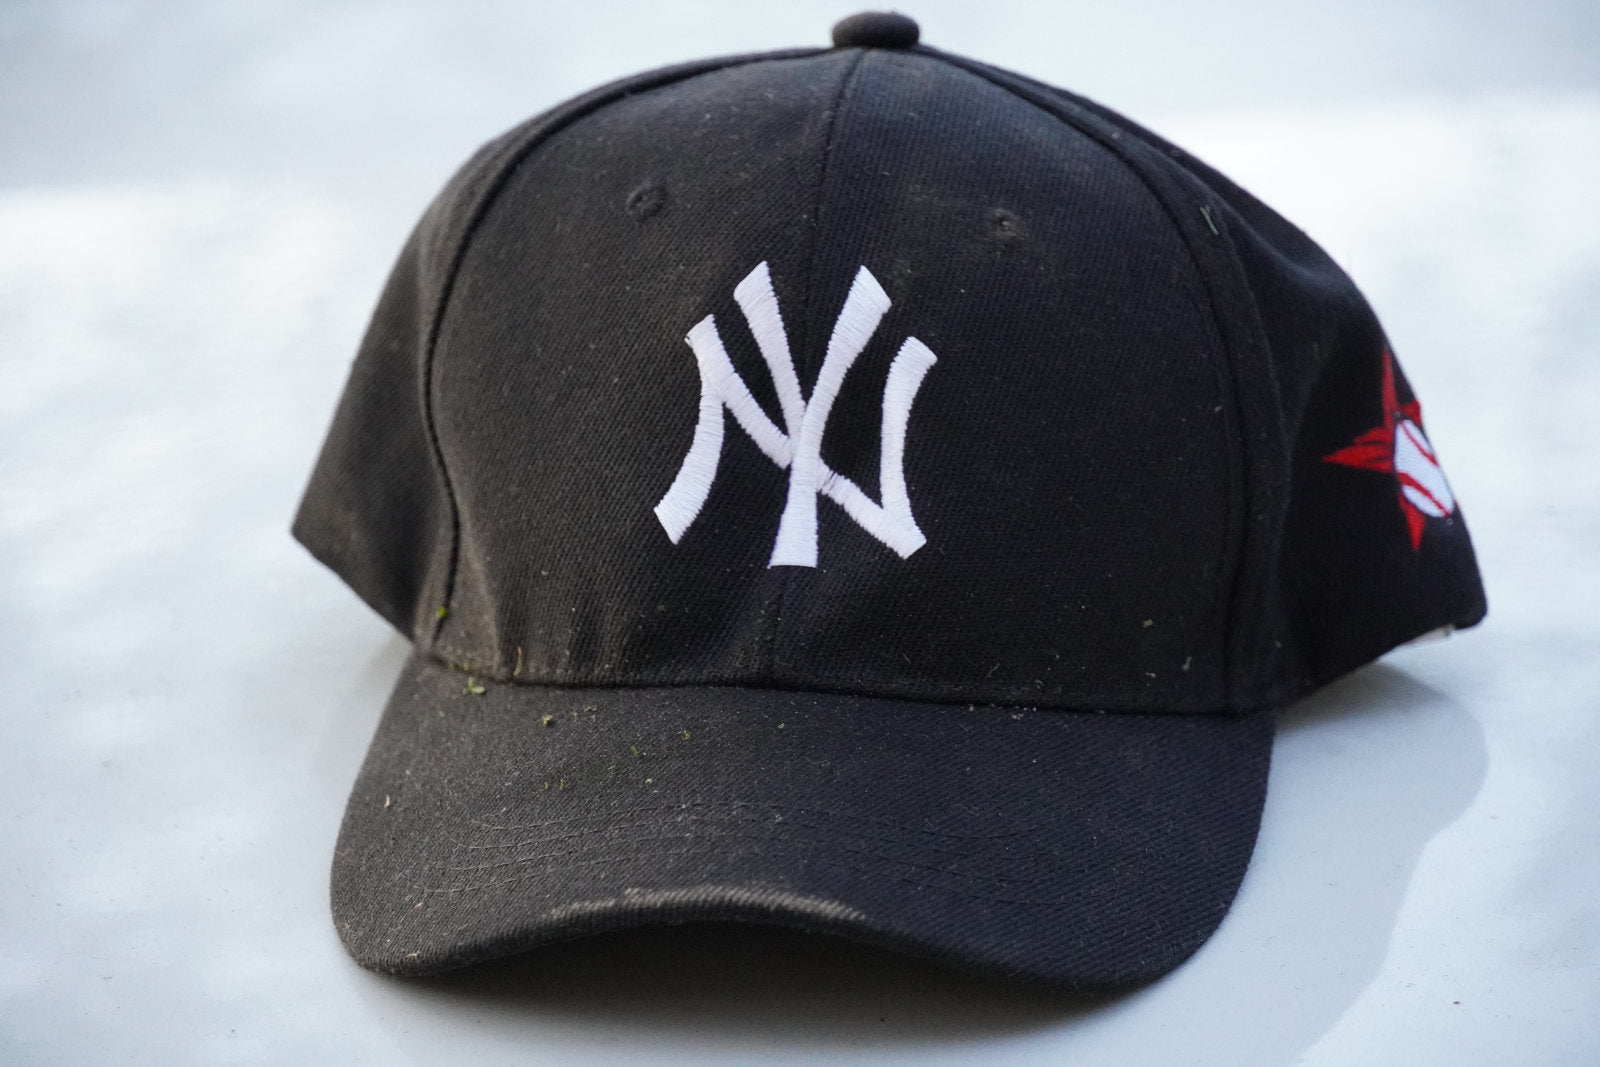 How To Remove Stains From Your Hat